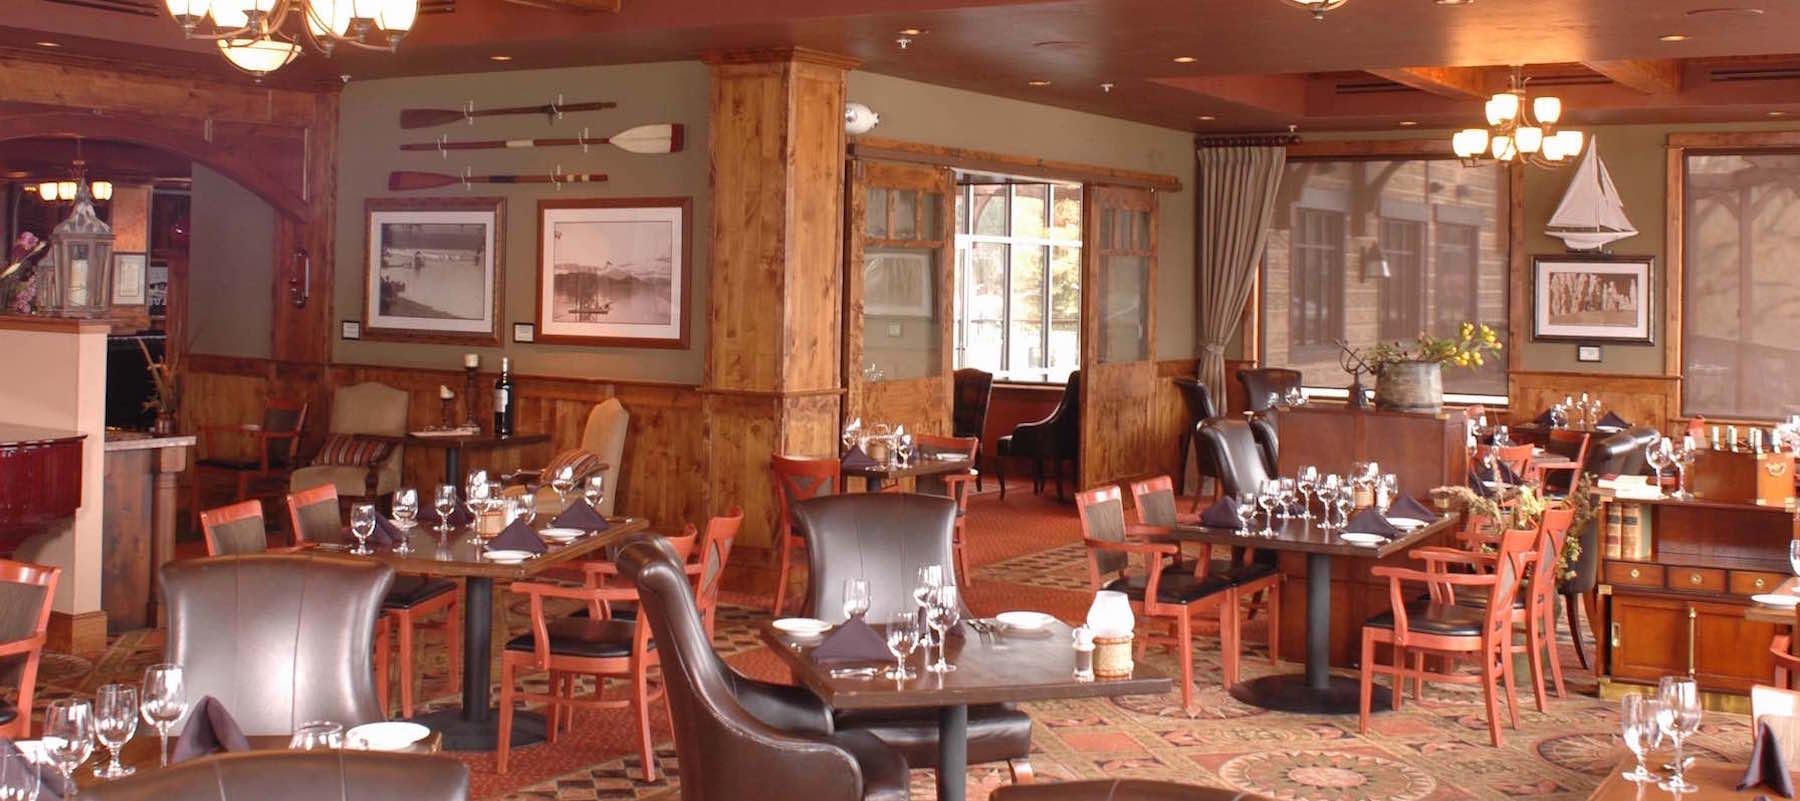 The Boat Club offers a relaxed dining atmosphere